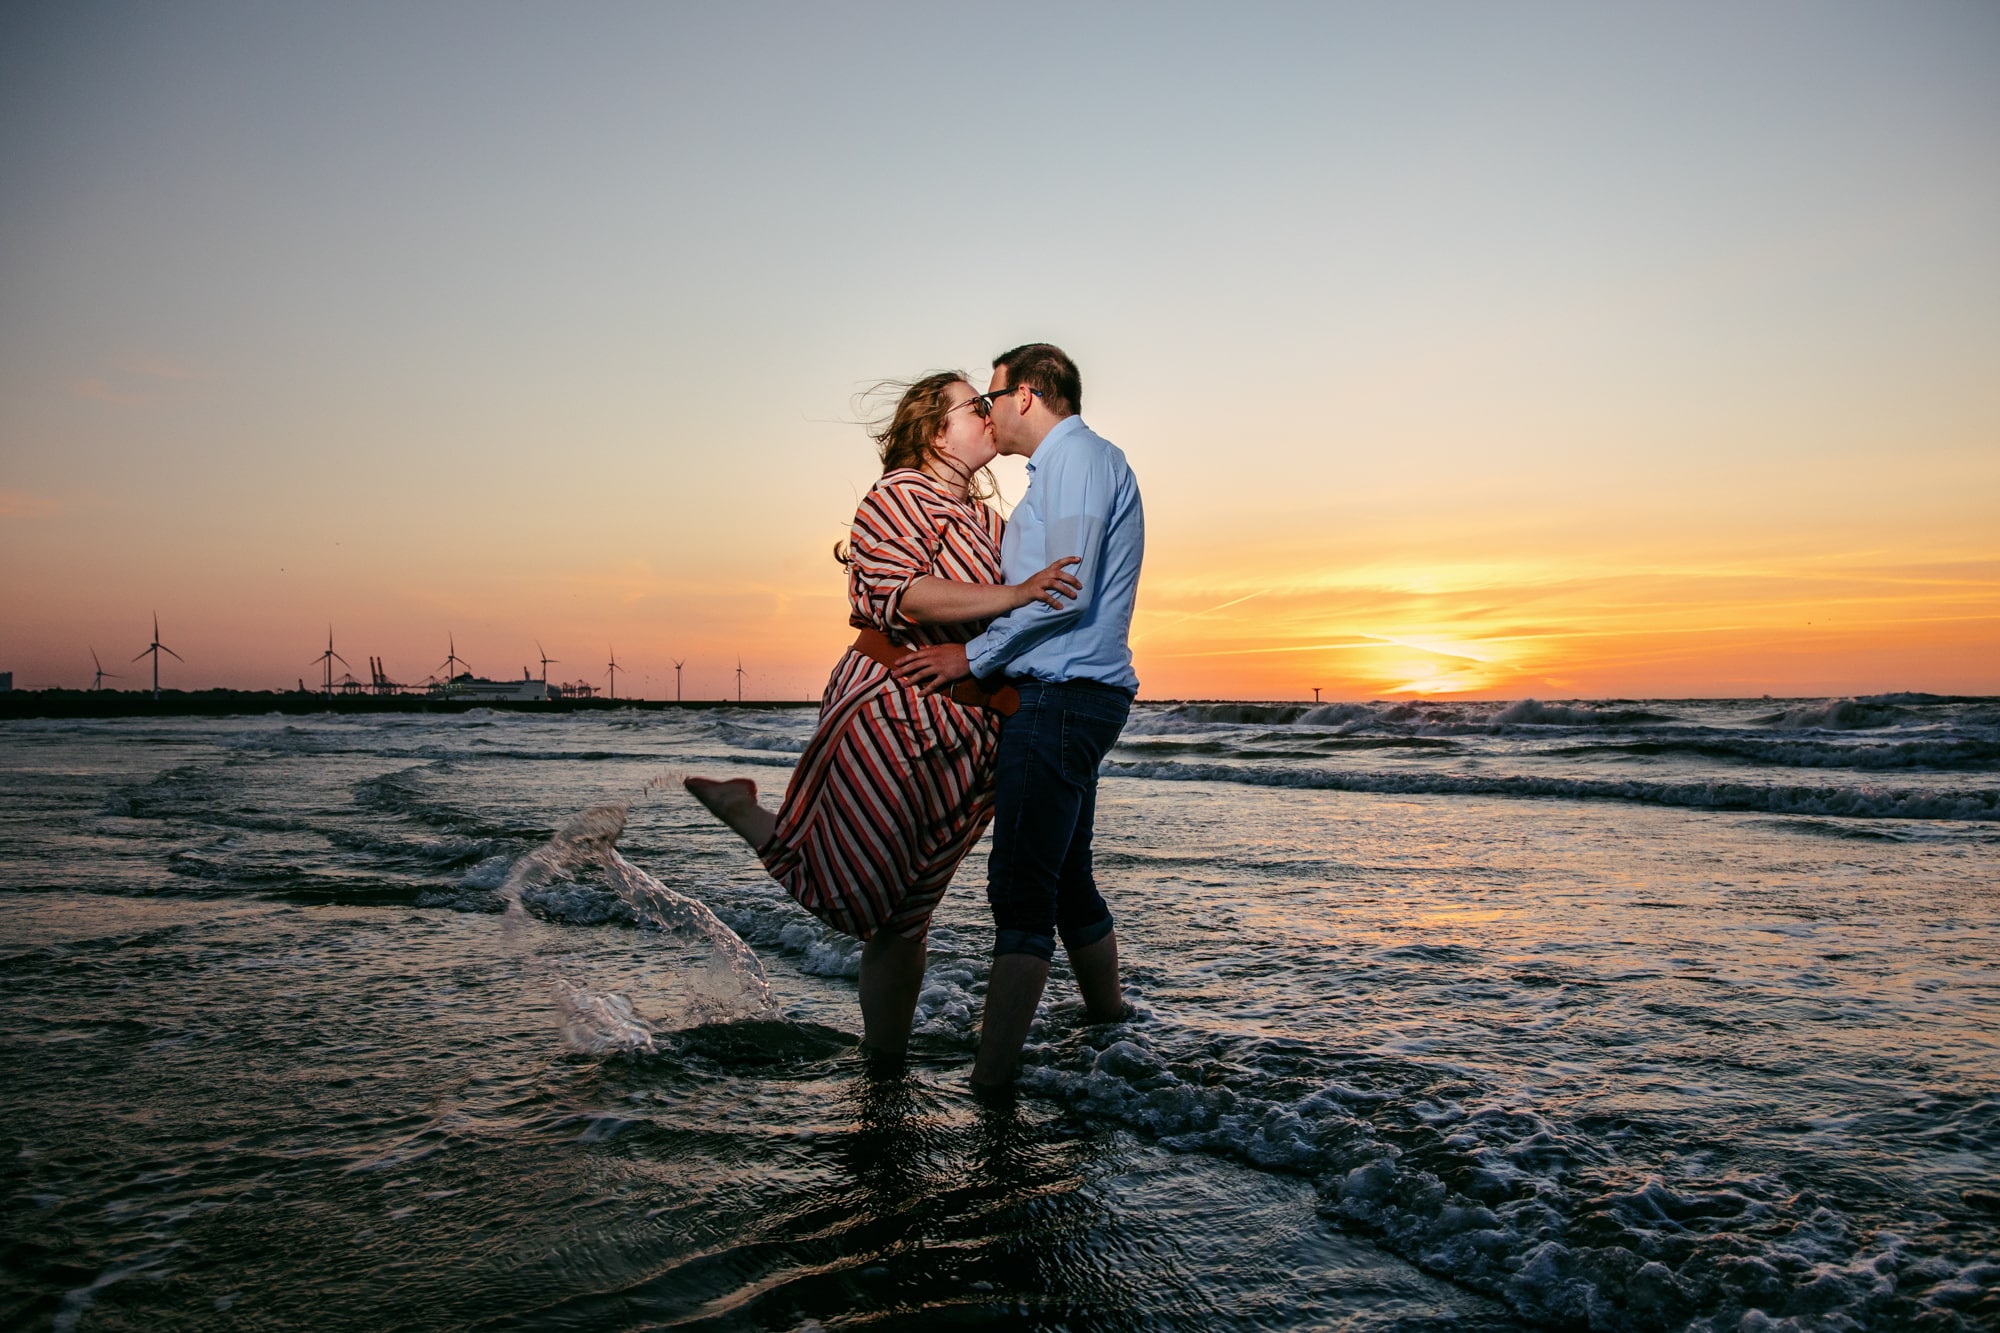 A passionate love shoot capturing a kissing couple in the ocean at sunset.